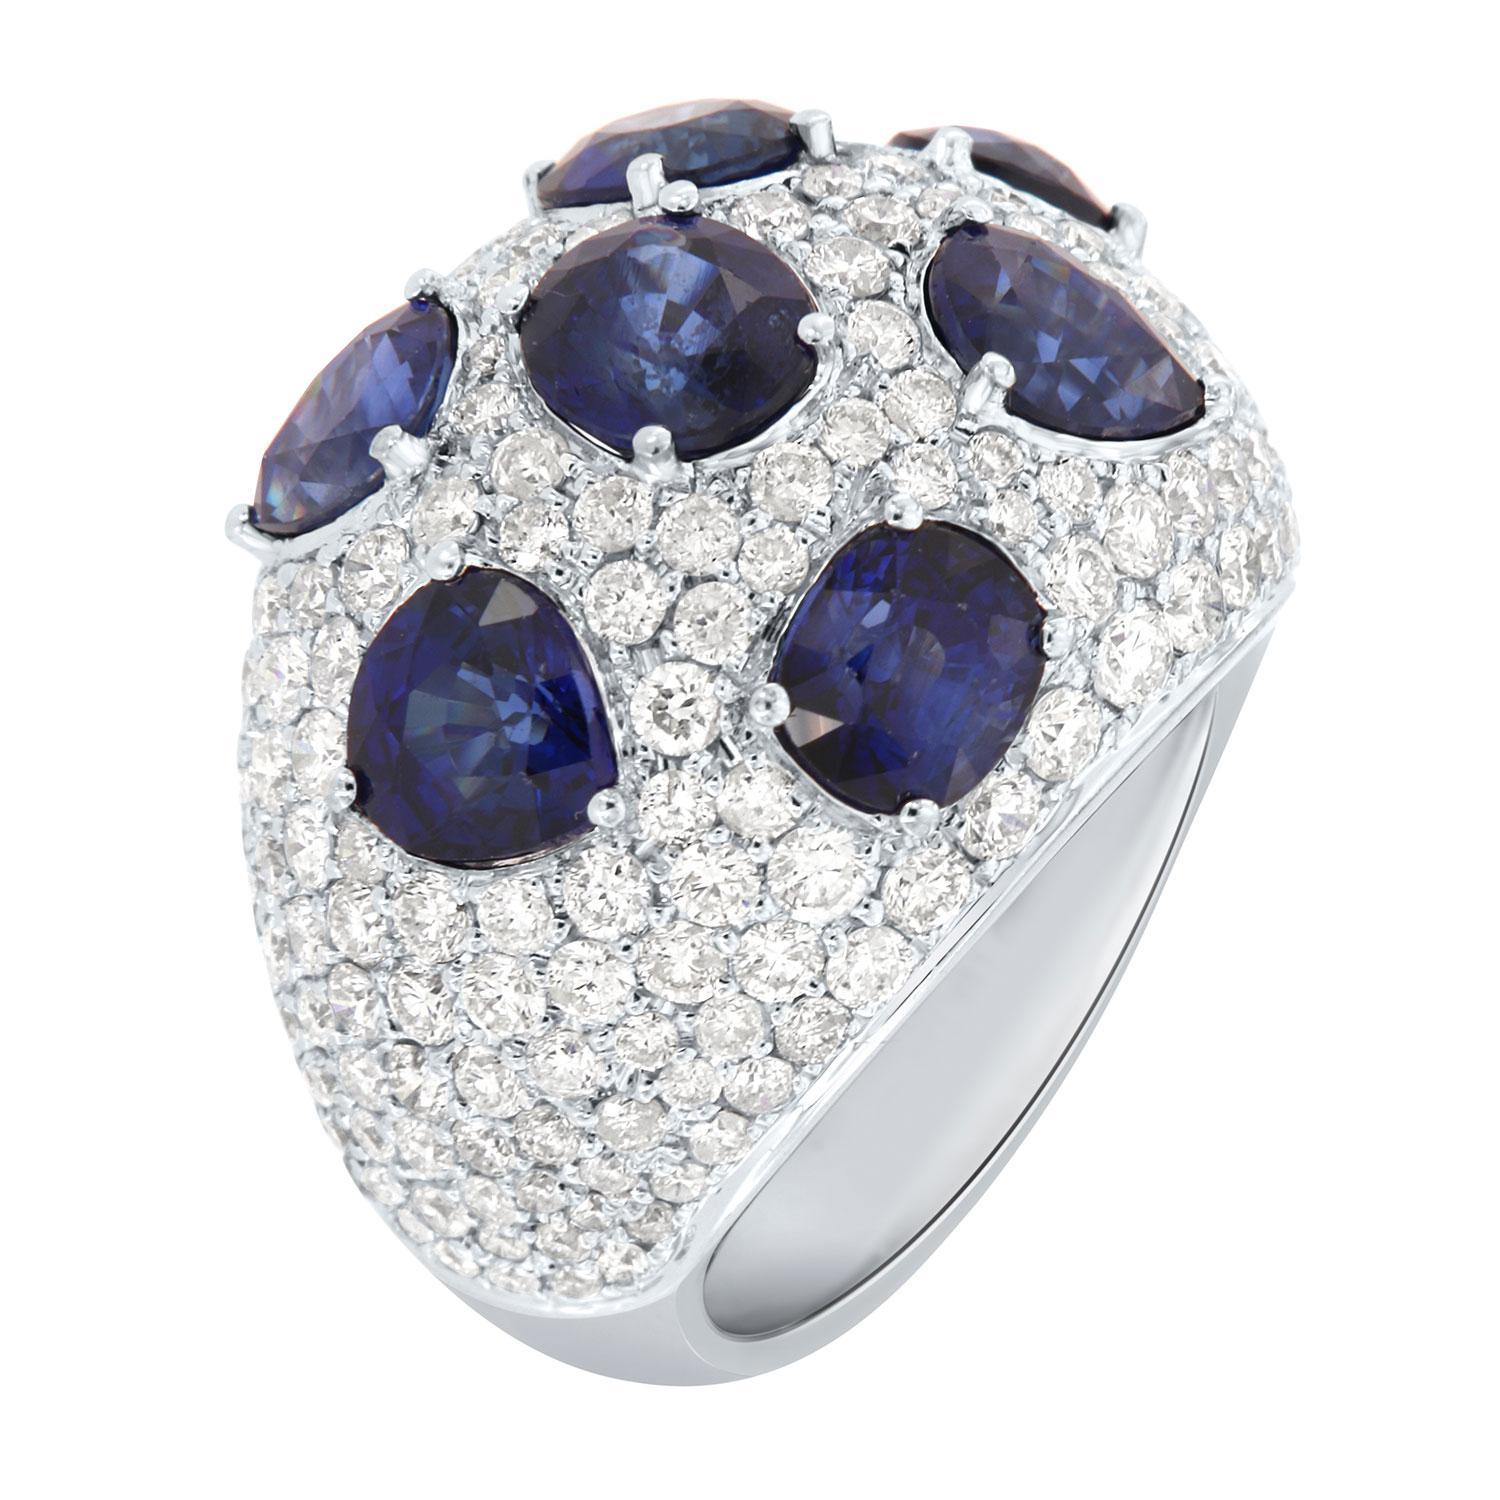 This one-of-a-kind ring features varied shapes natural sapphires approximately 1 carat each ( 7.77 Carat Total Weight) prong set surrounded by a brilliant ideal cut diamonds micro-prong set in a total weight of 3.65 carats. The ring is